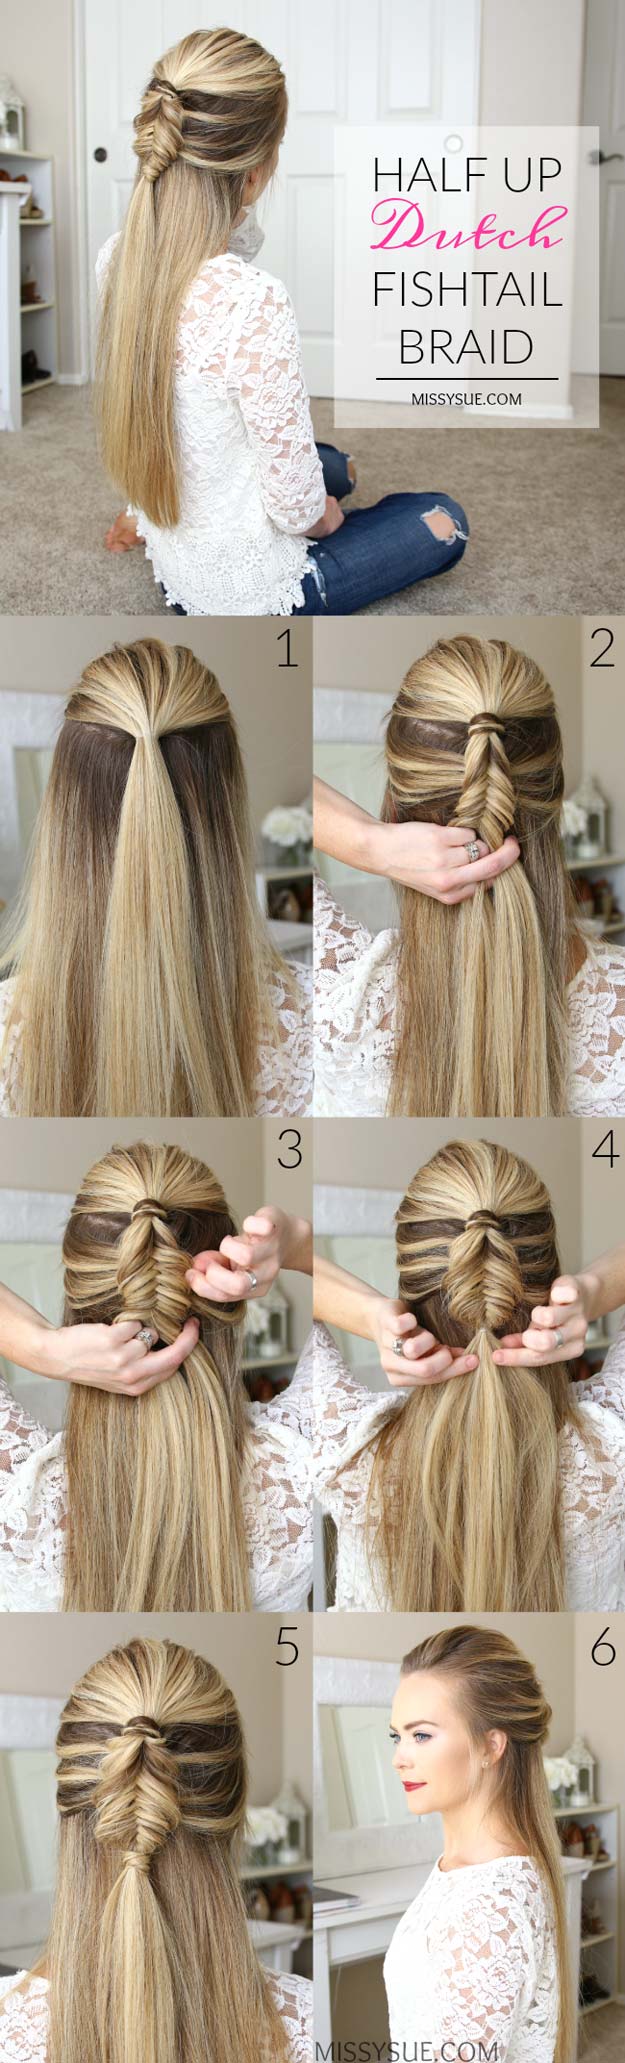 67 Unique Easy hairstyles for long hair to do at home step by step for Rounded Face